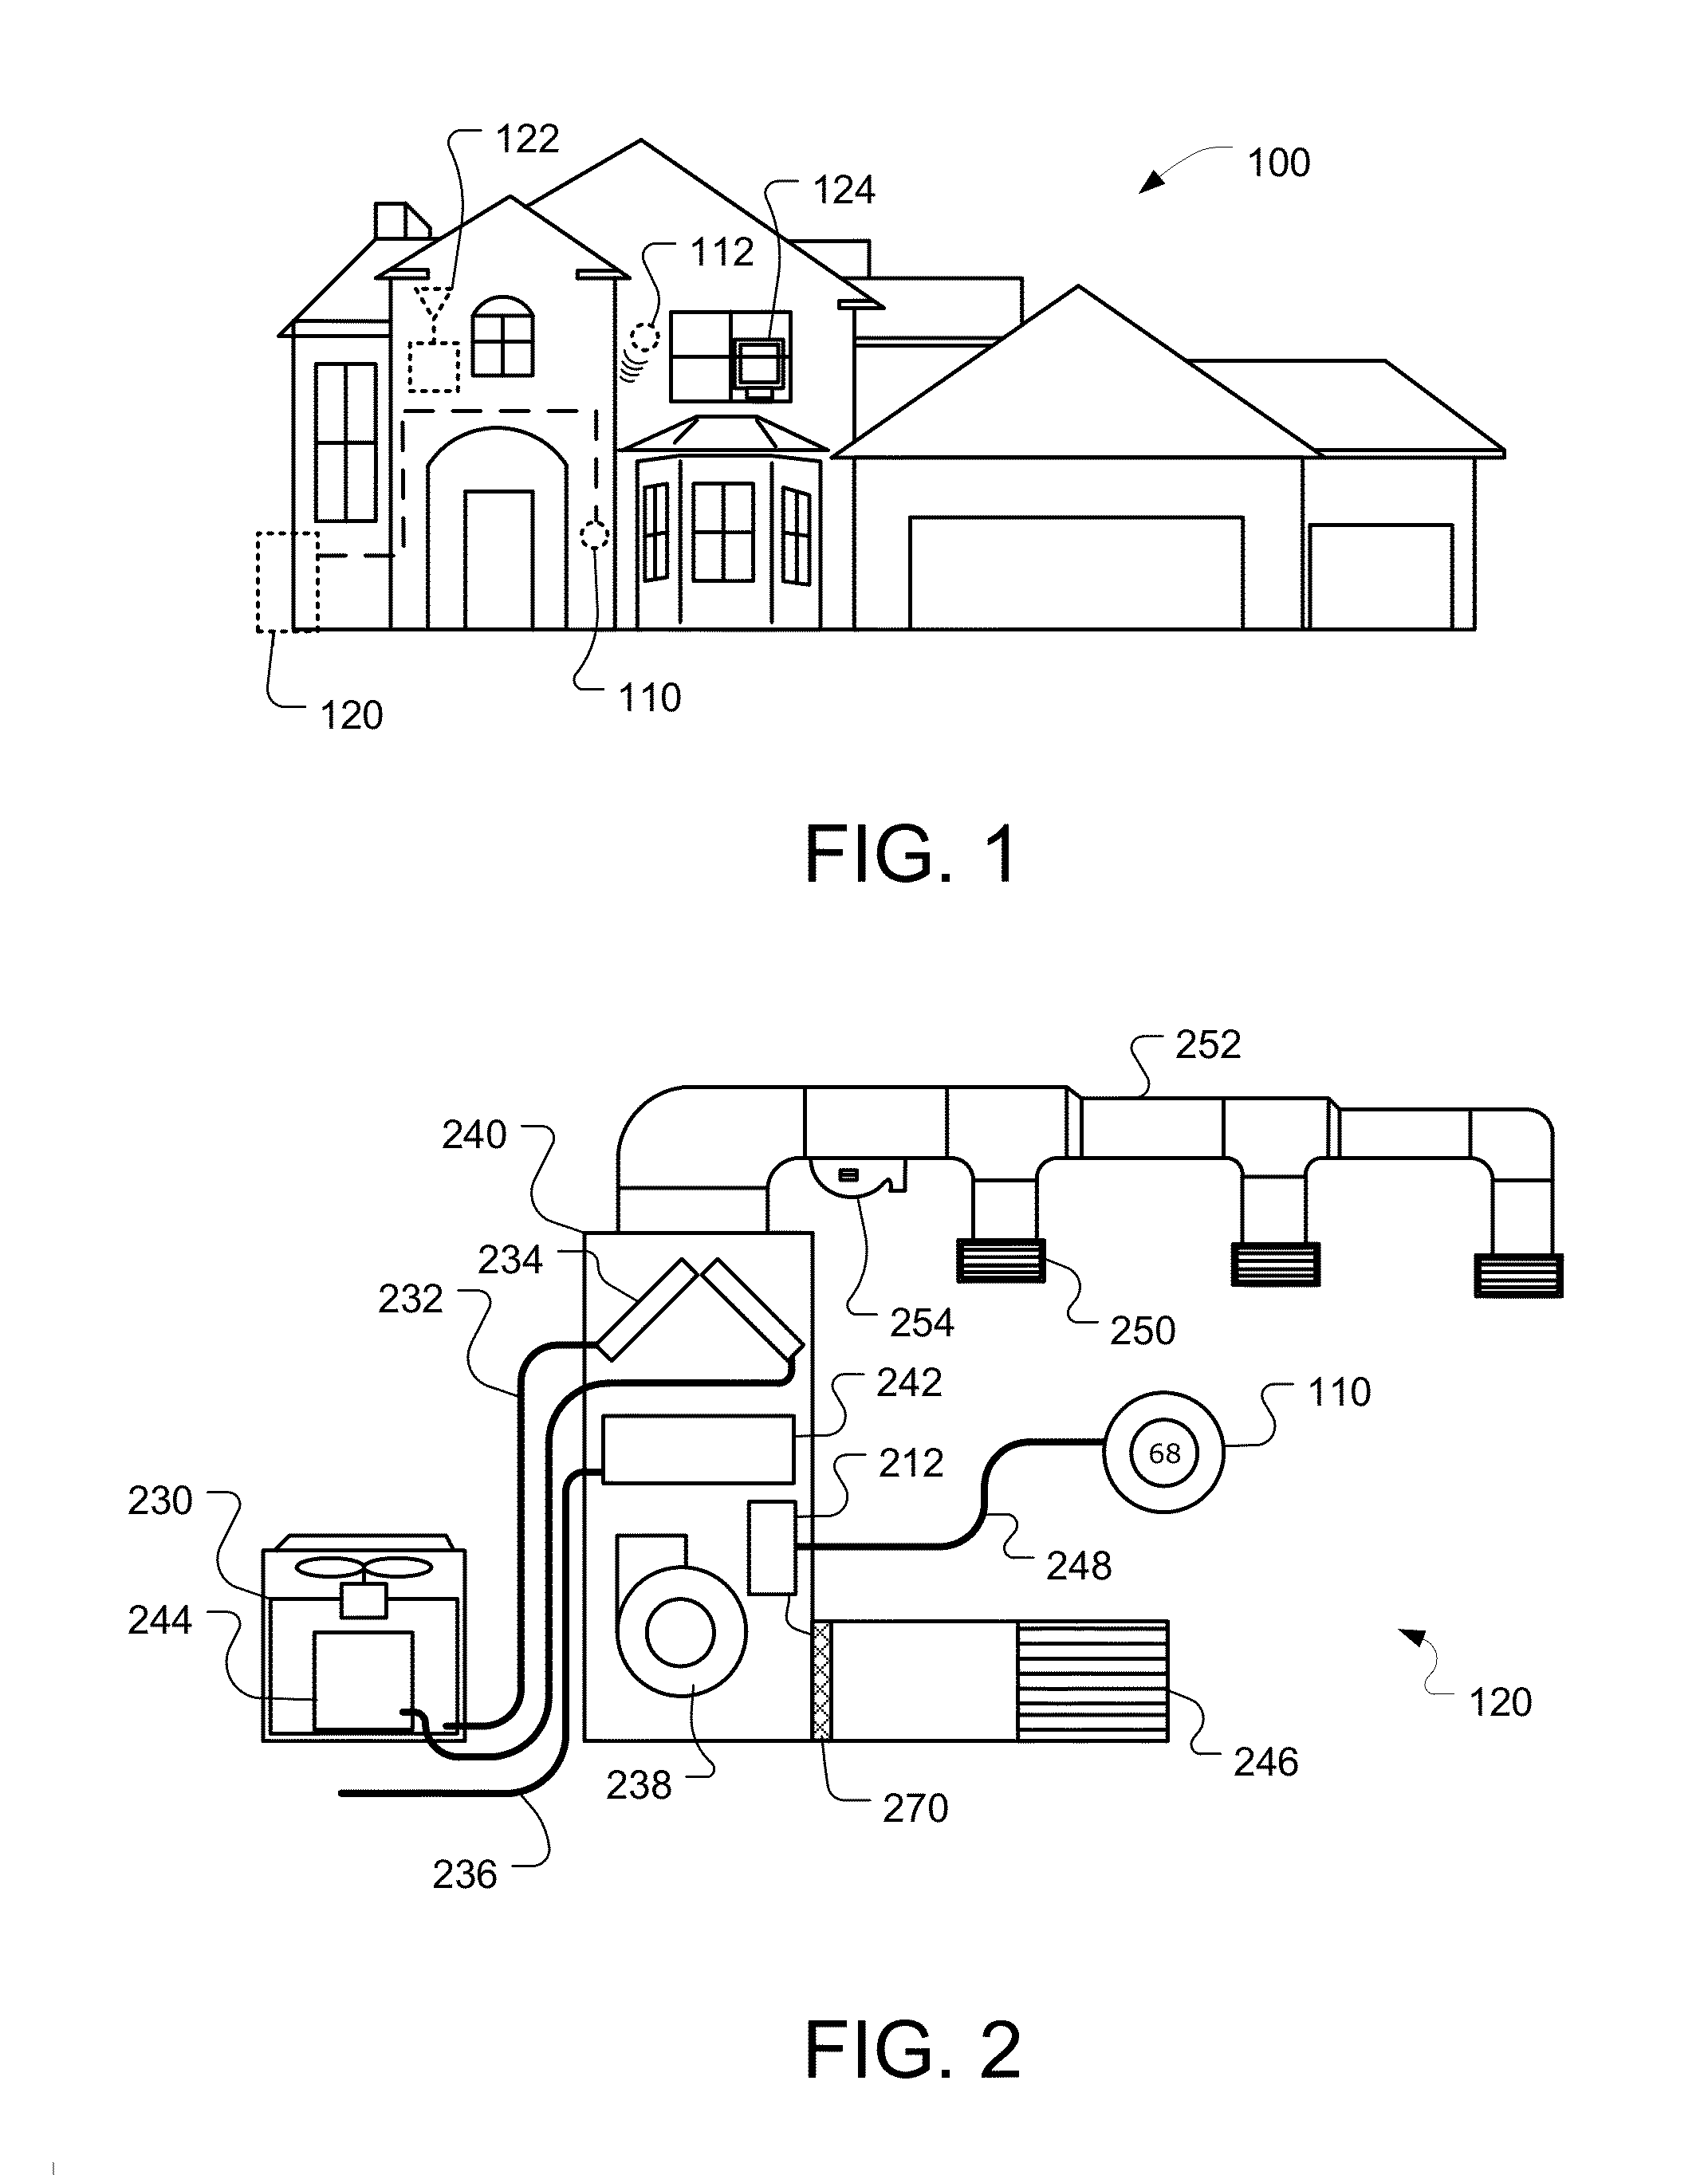 Thermostat with power stealing delay interval at transitions between power stealing states